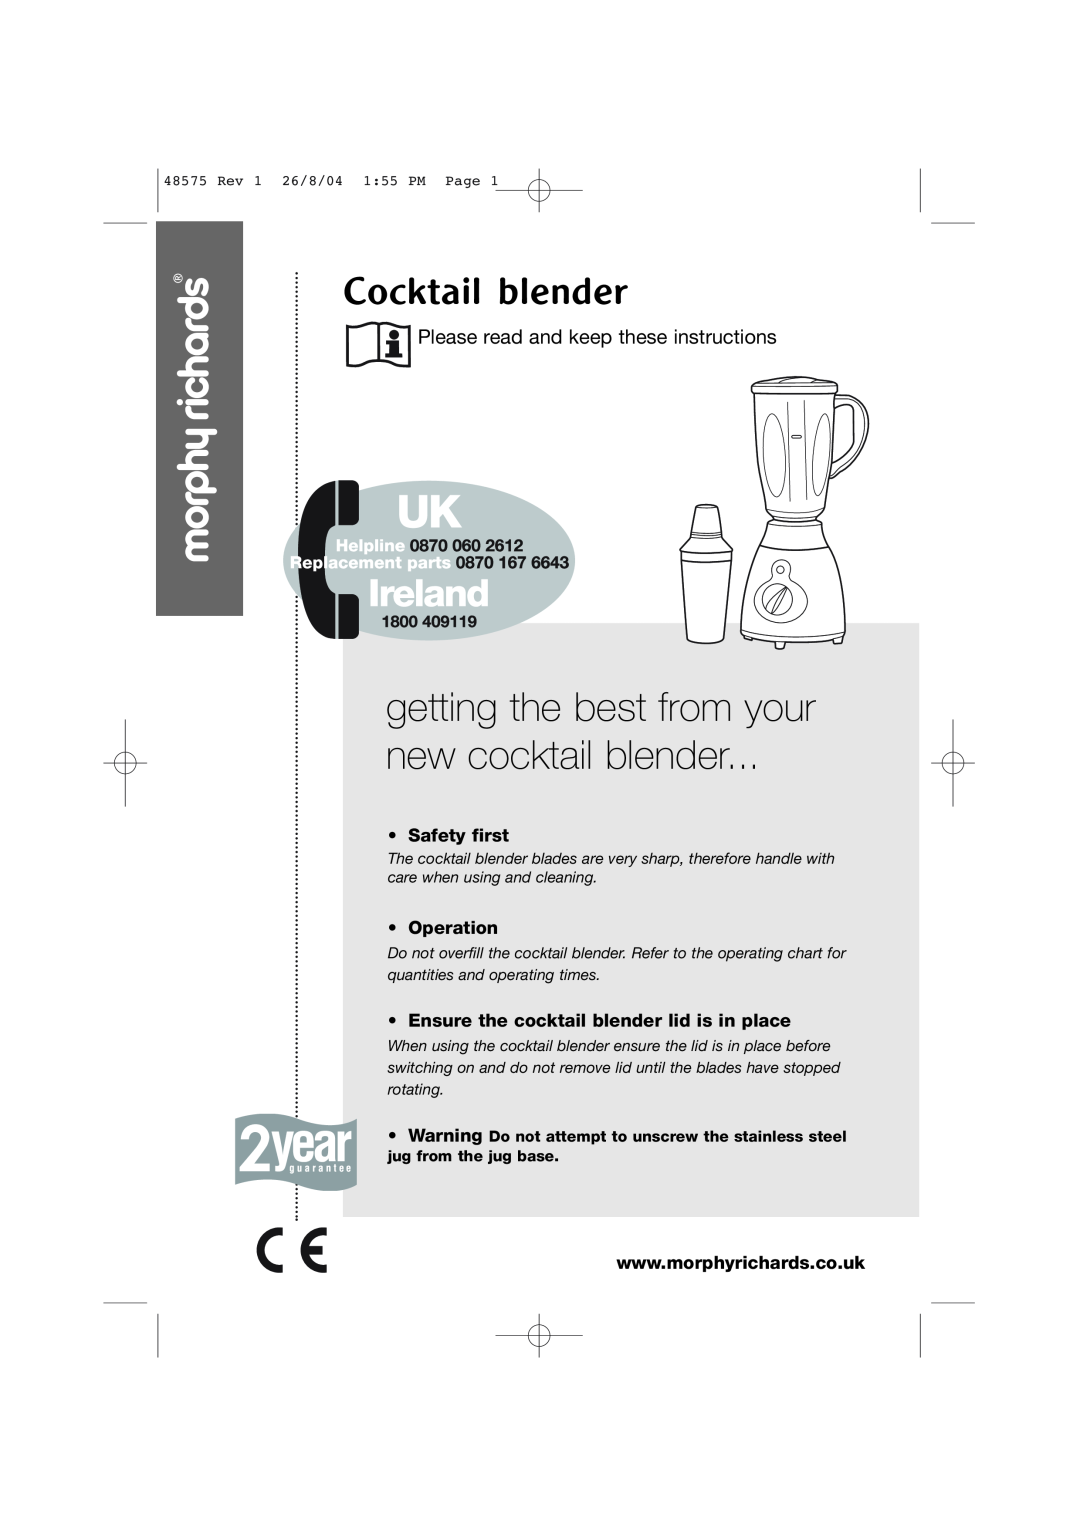 Morphy Richards Cocktail blender manual Please read and keep these instructions, Safety first, Operation 